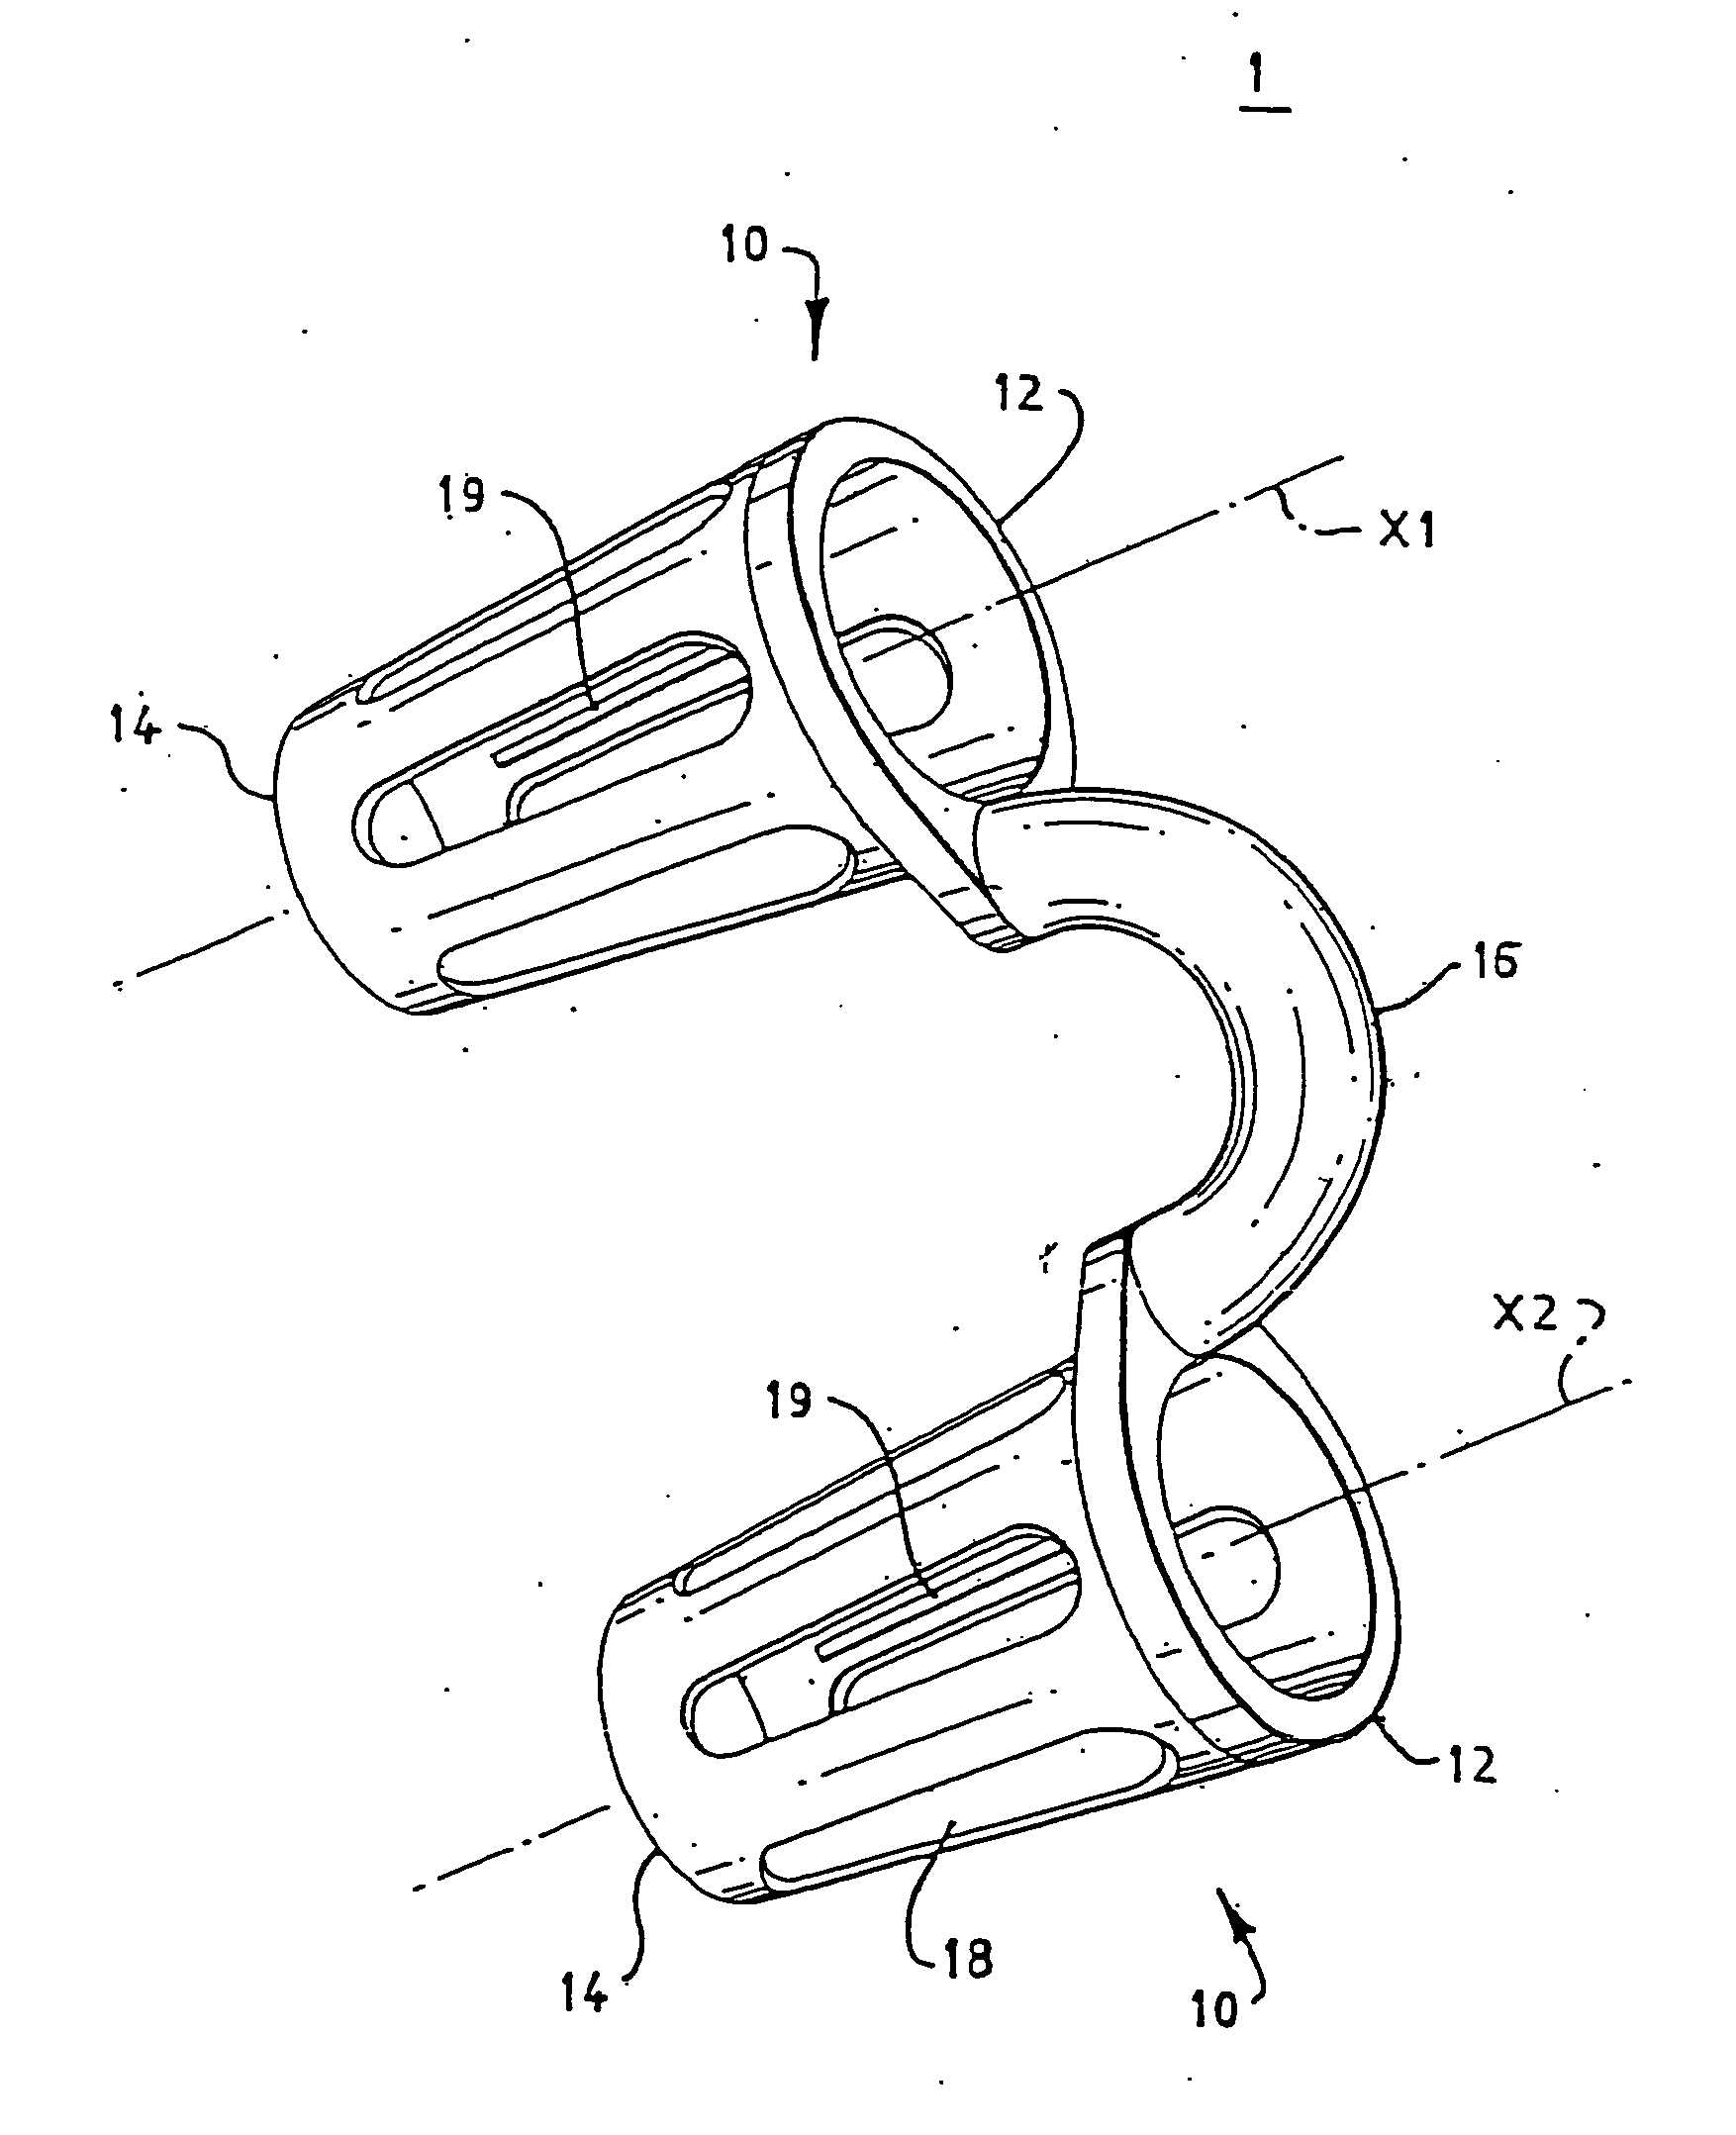 Nasal congestion and obstruction relief and breathing assist devices